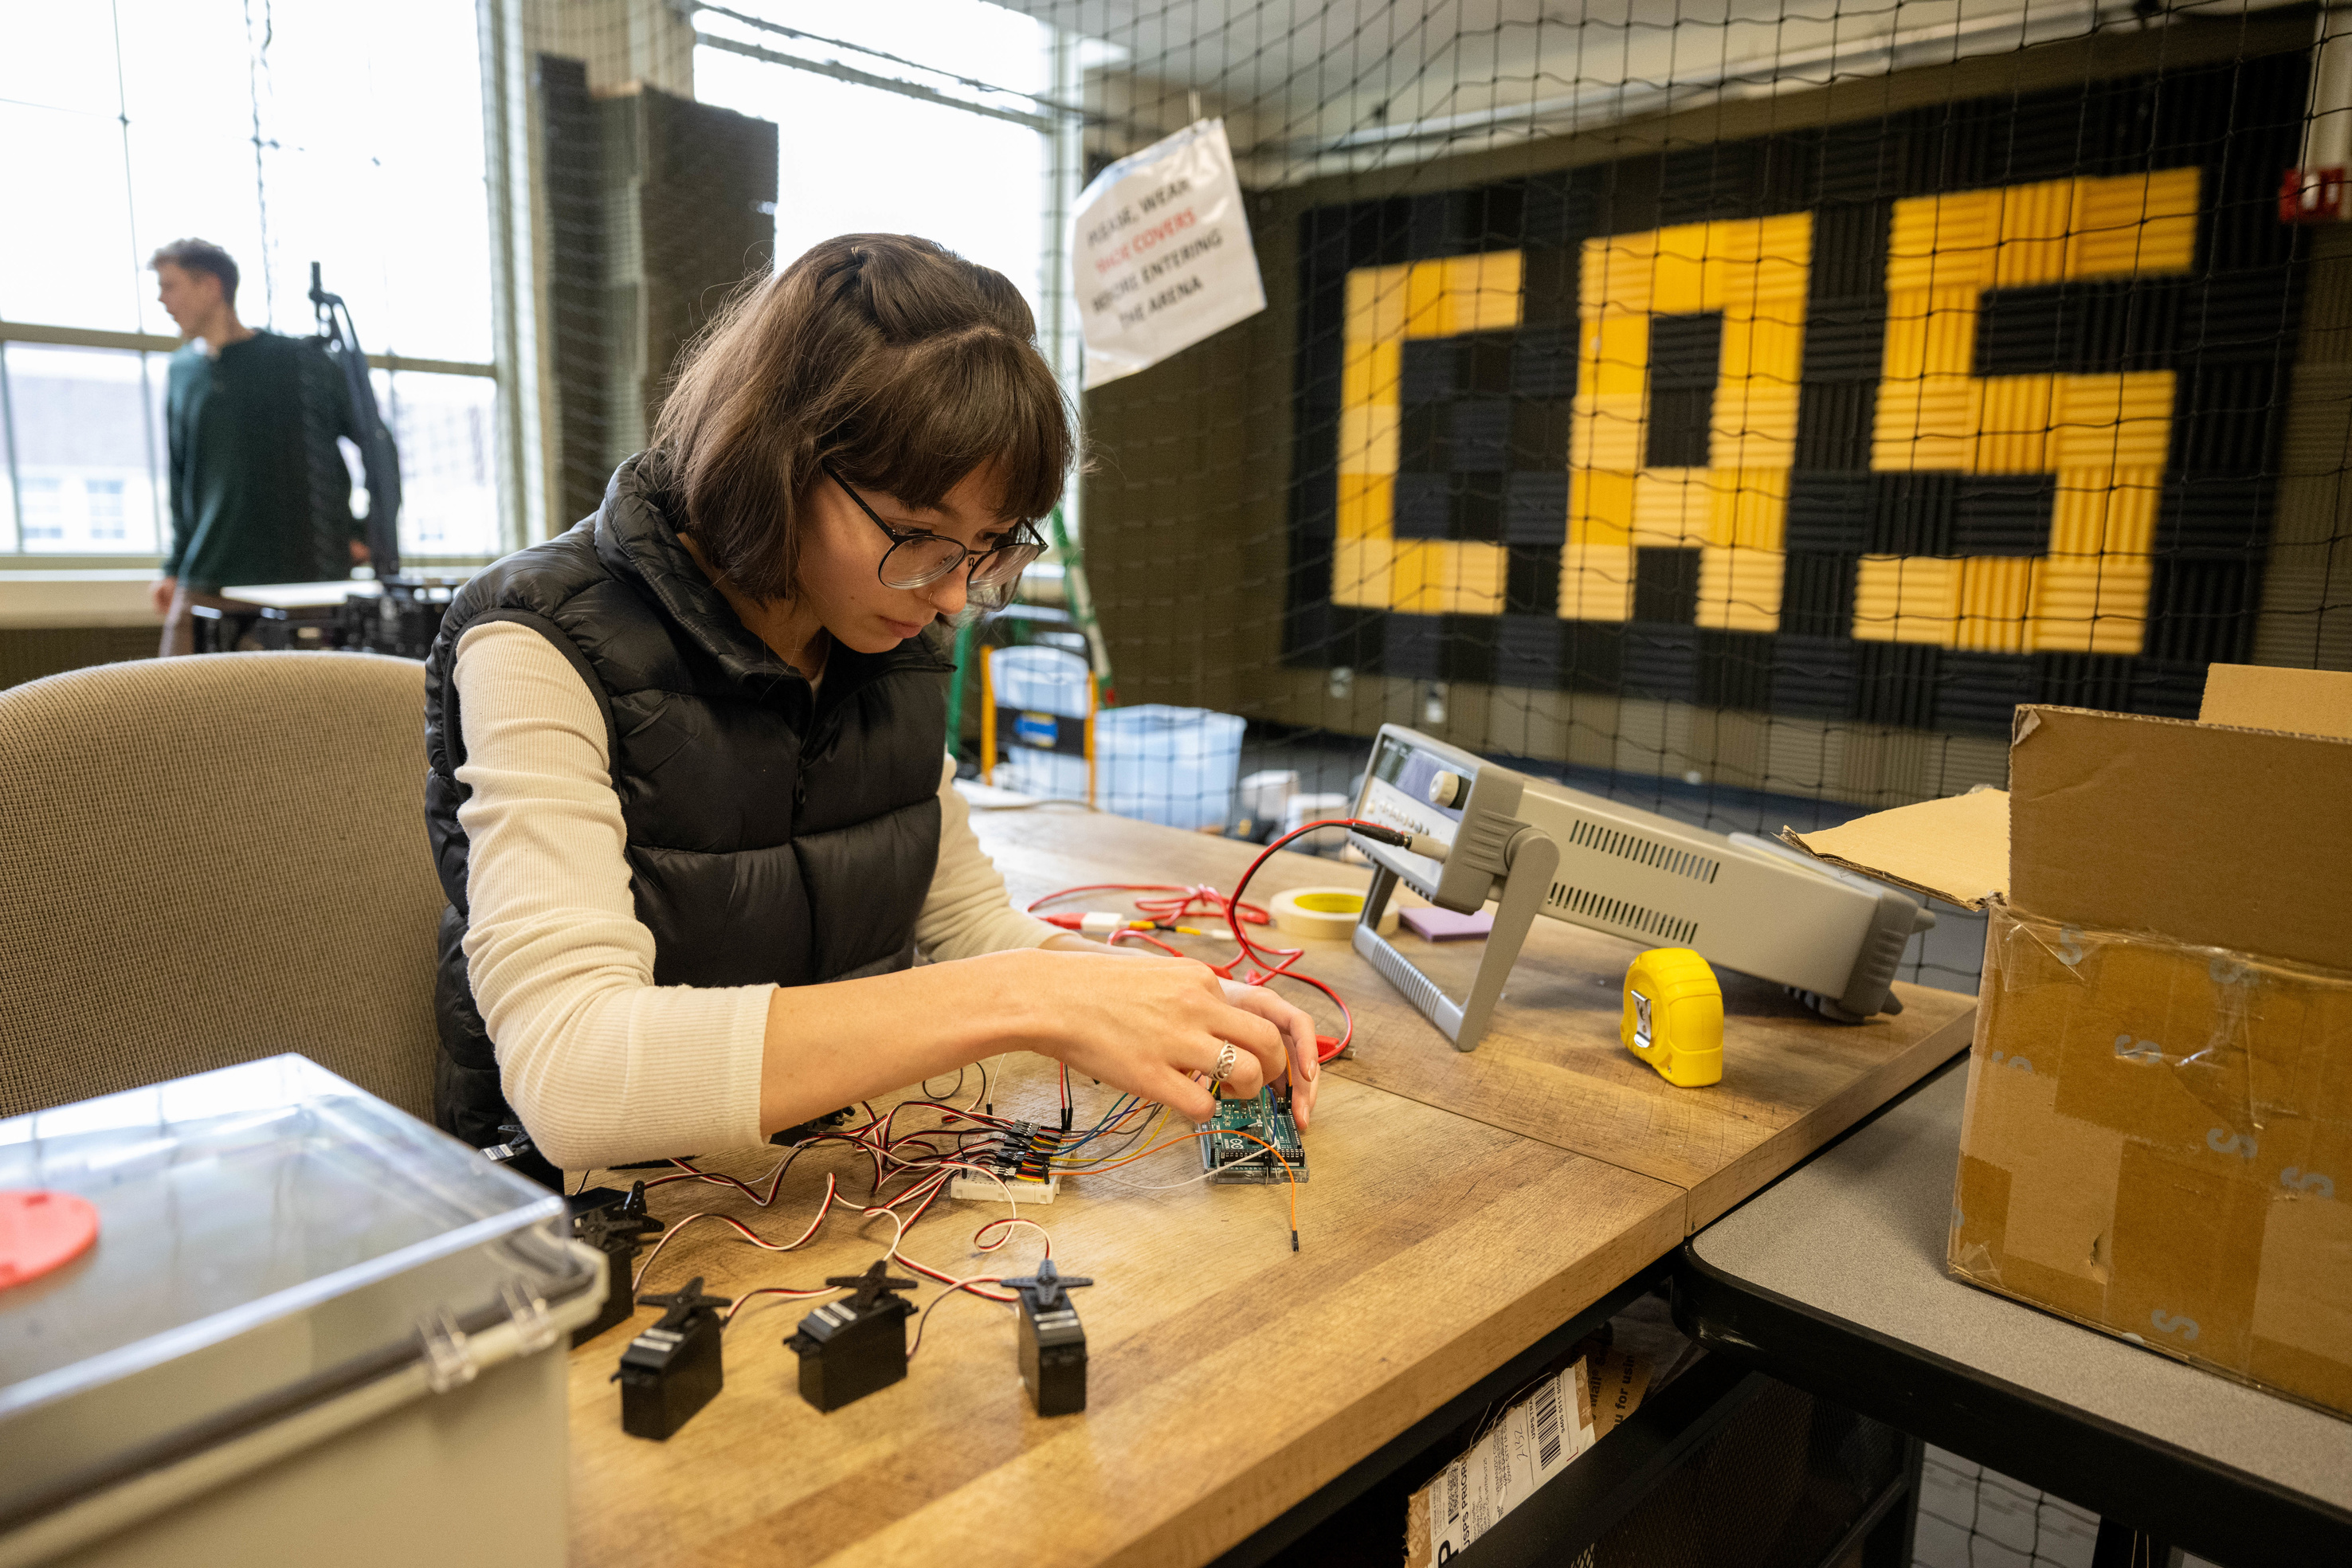 A woman works in the Cooperative Autonomous Systems Lab within the College of Engineering.